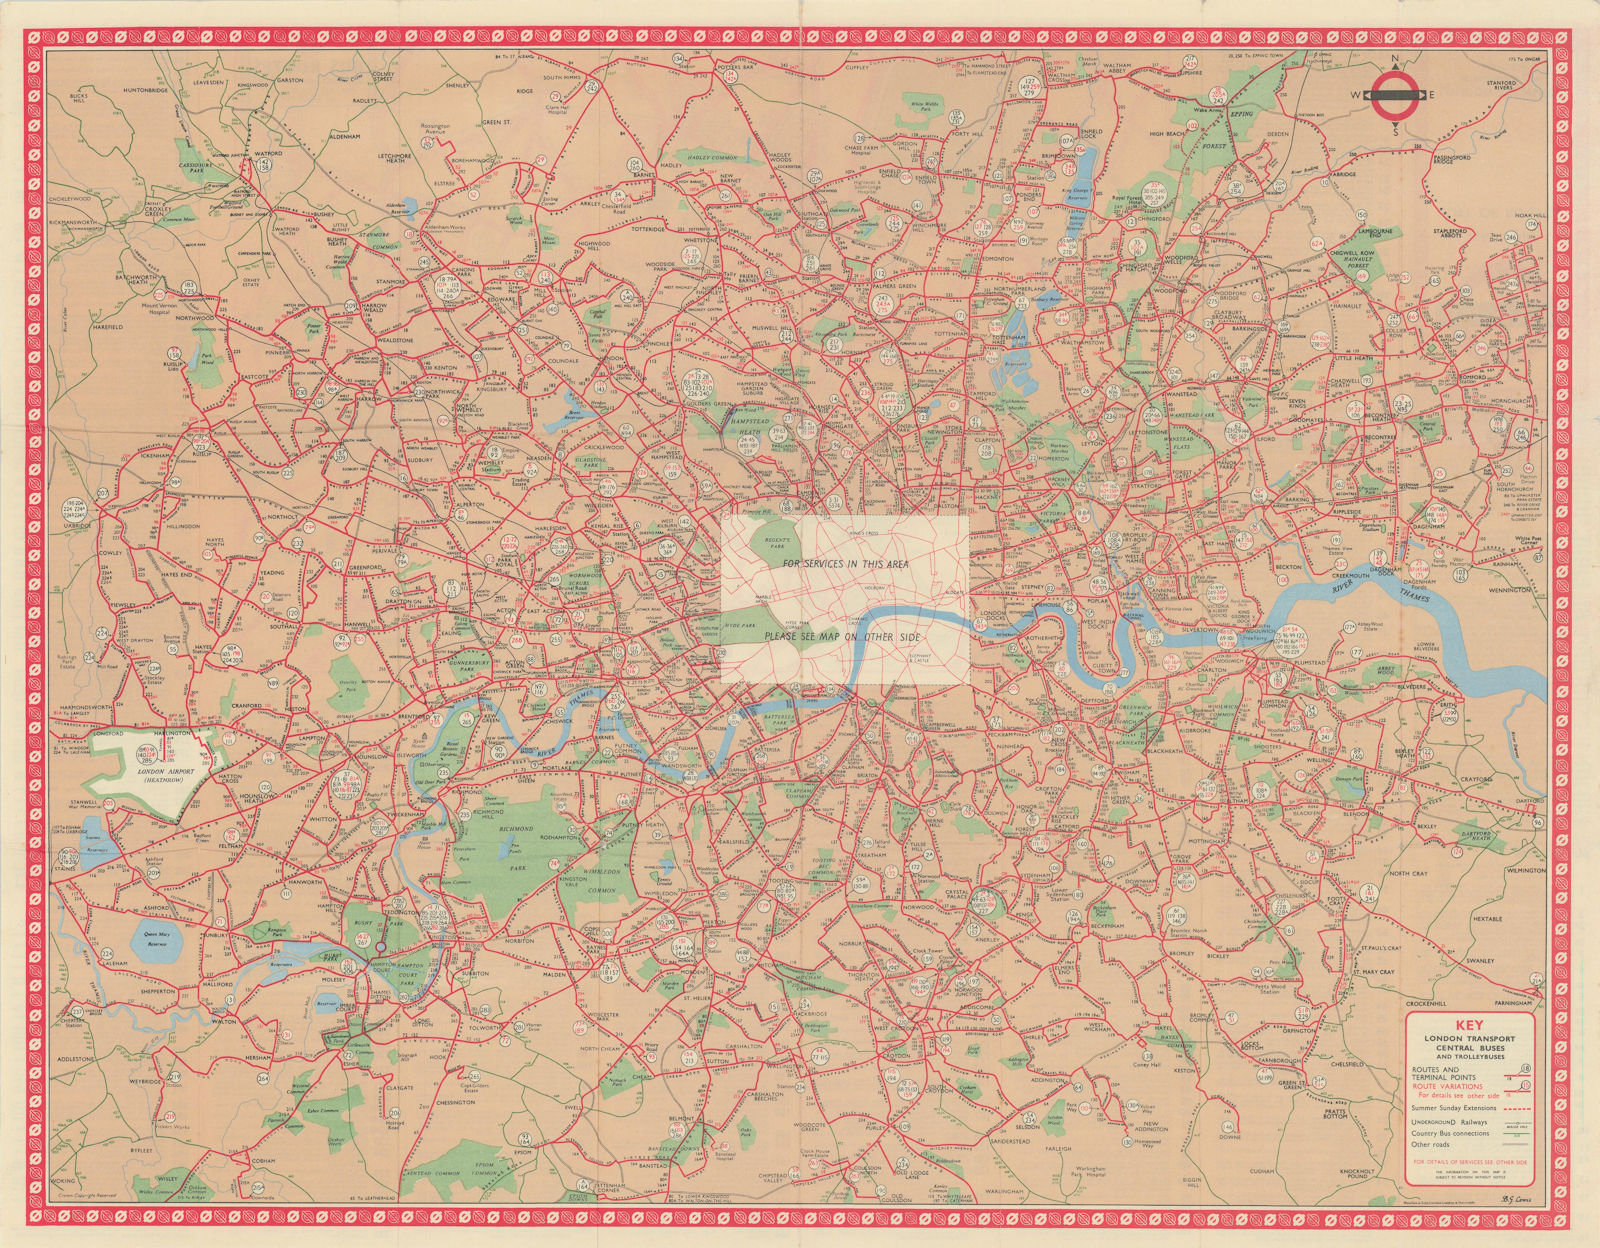 London Transport Central Buses map and list of routes. LEWIS #2 1962 old